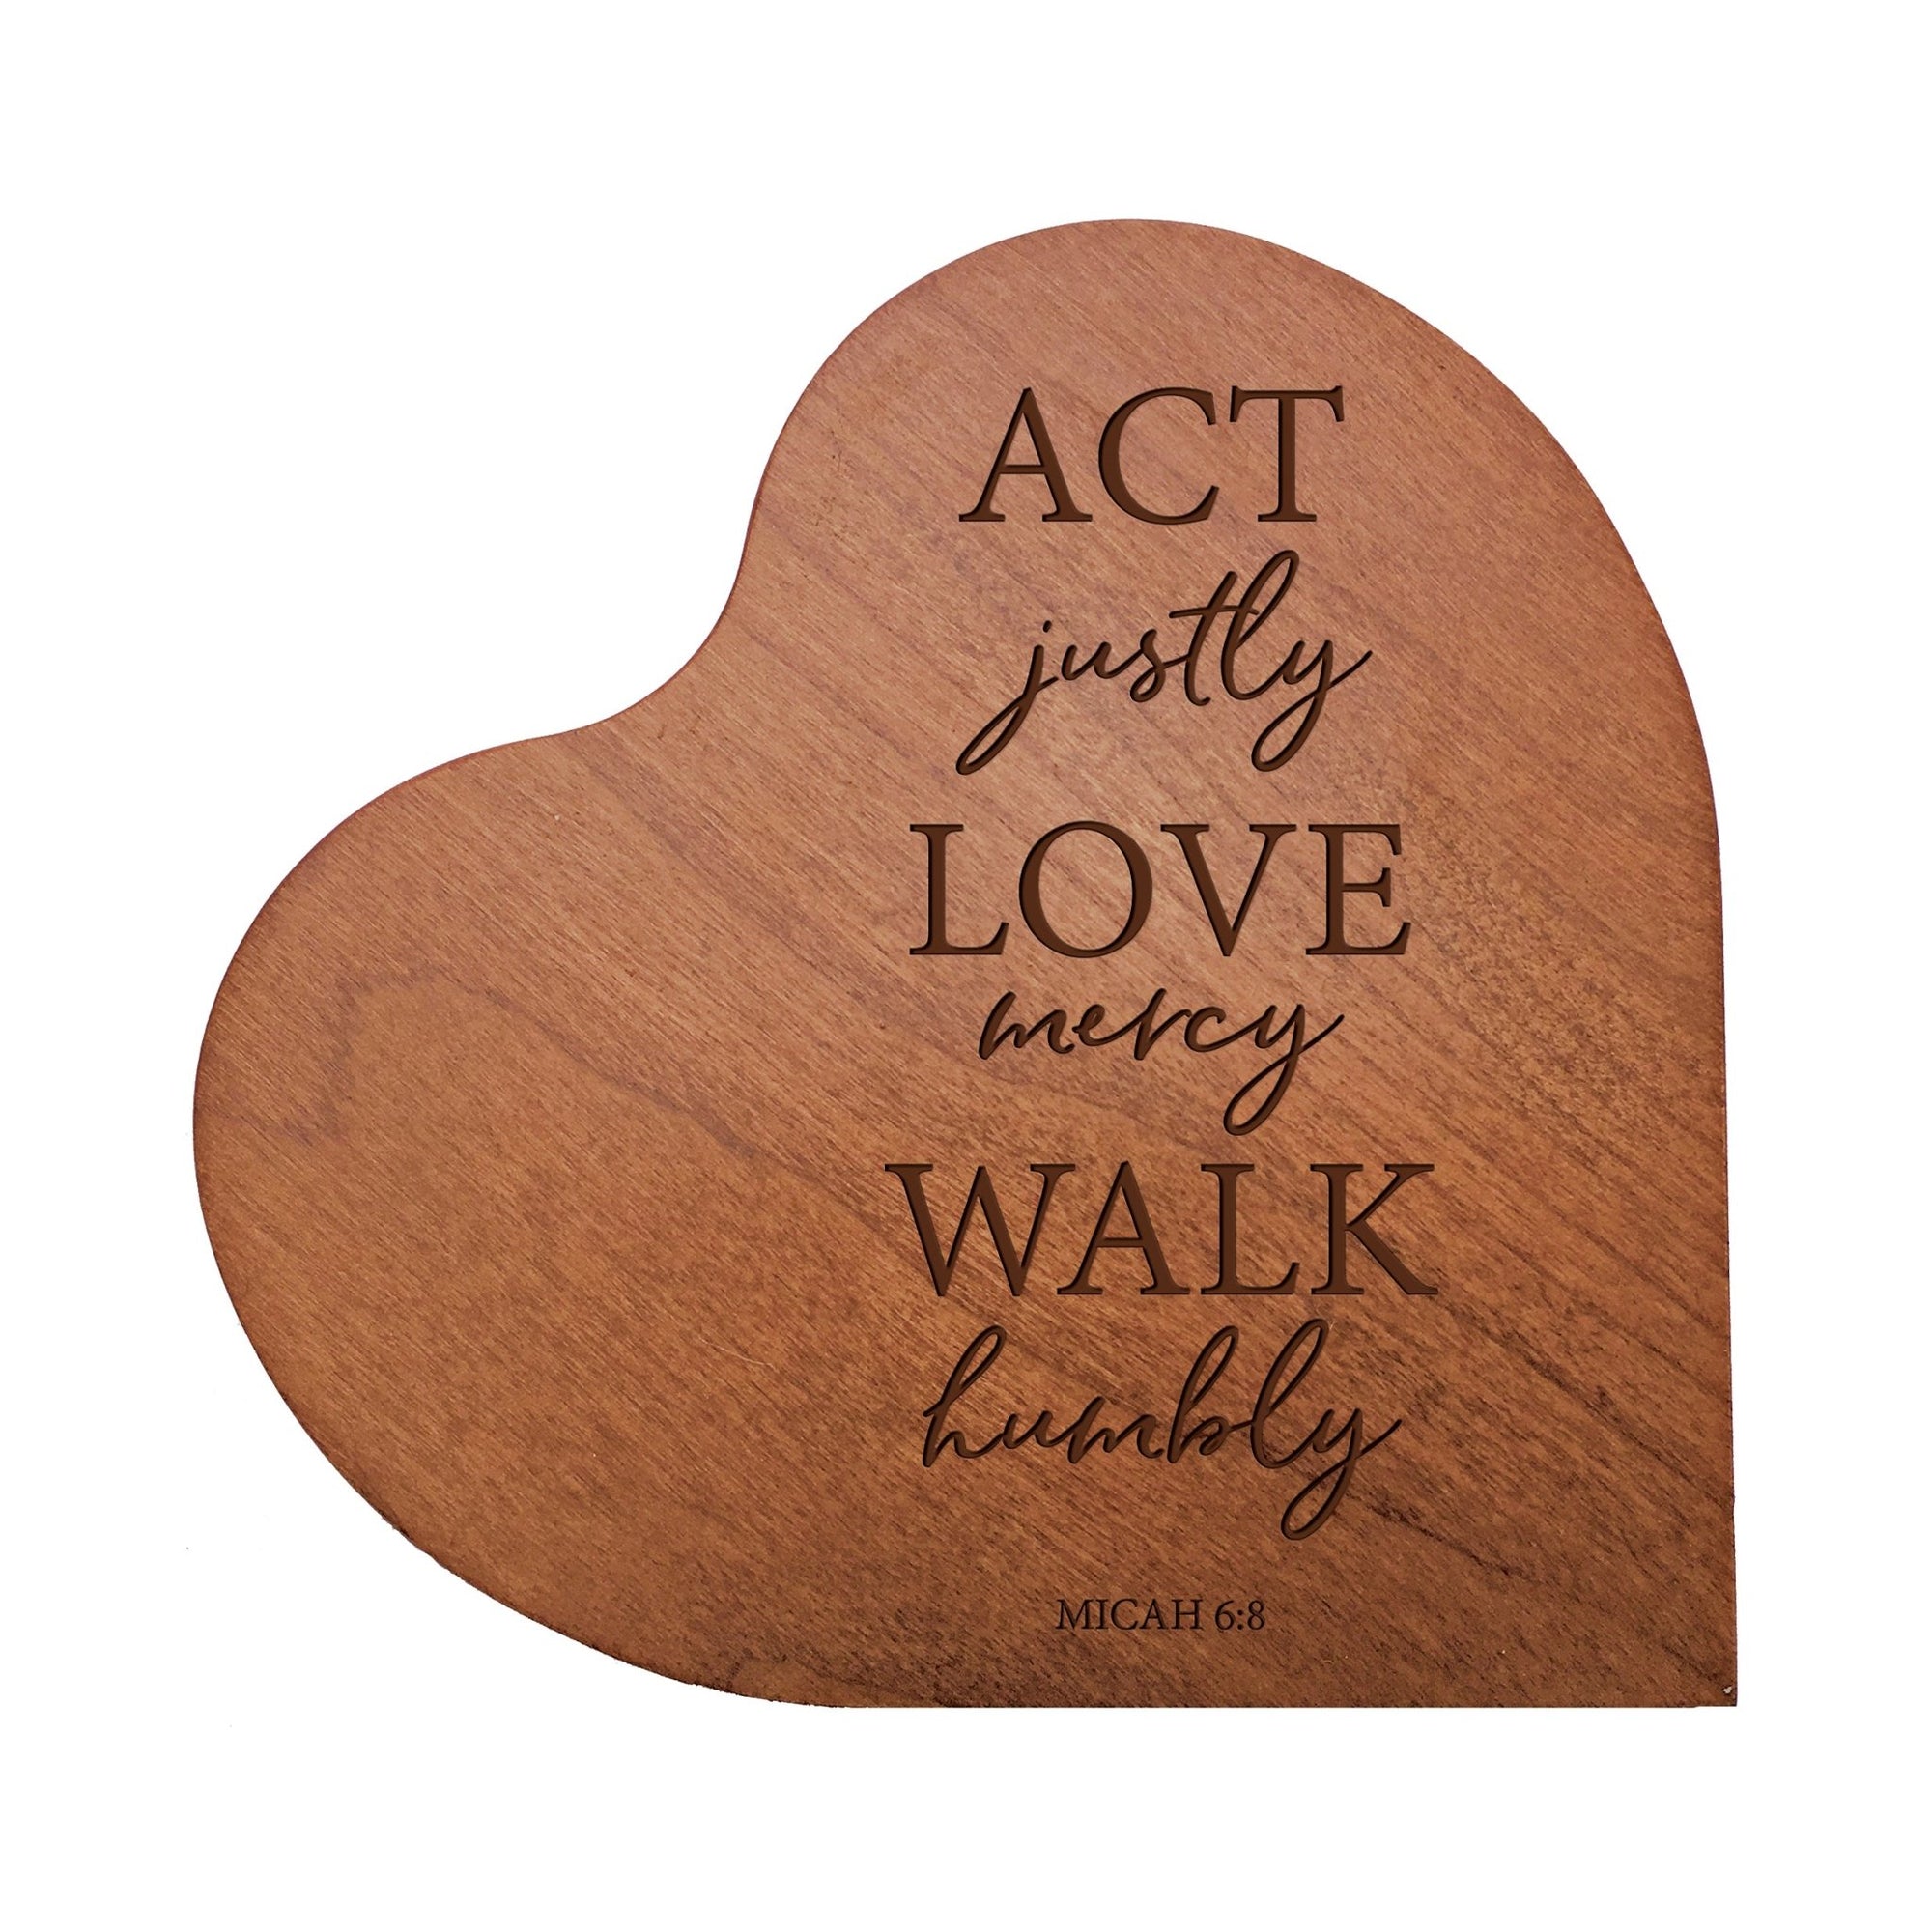 Engraved Wooden Inspirational Heart Block 5” x 5.25” x 0.75” - Act Justly Love Mercy - LifeSong Milestones